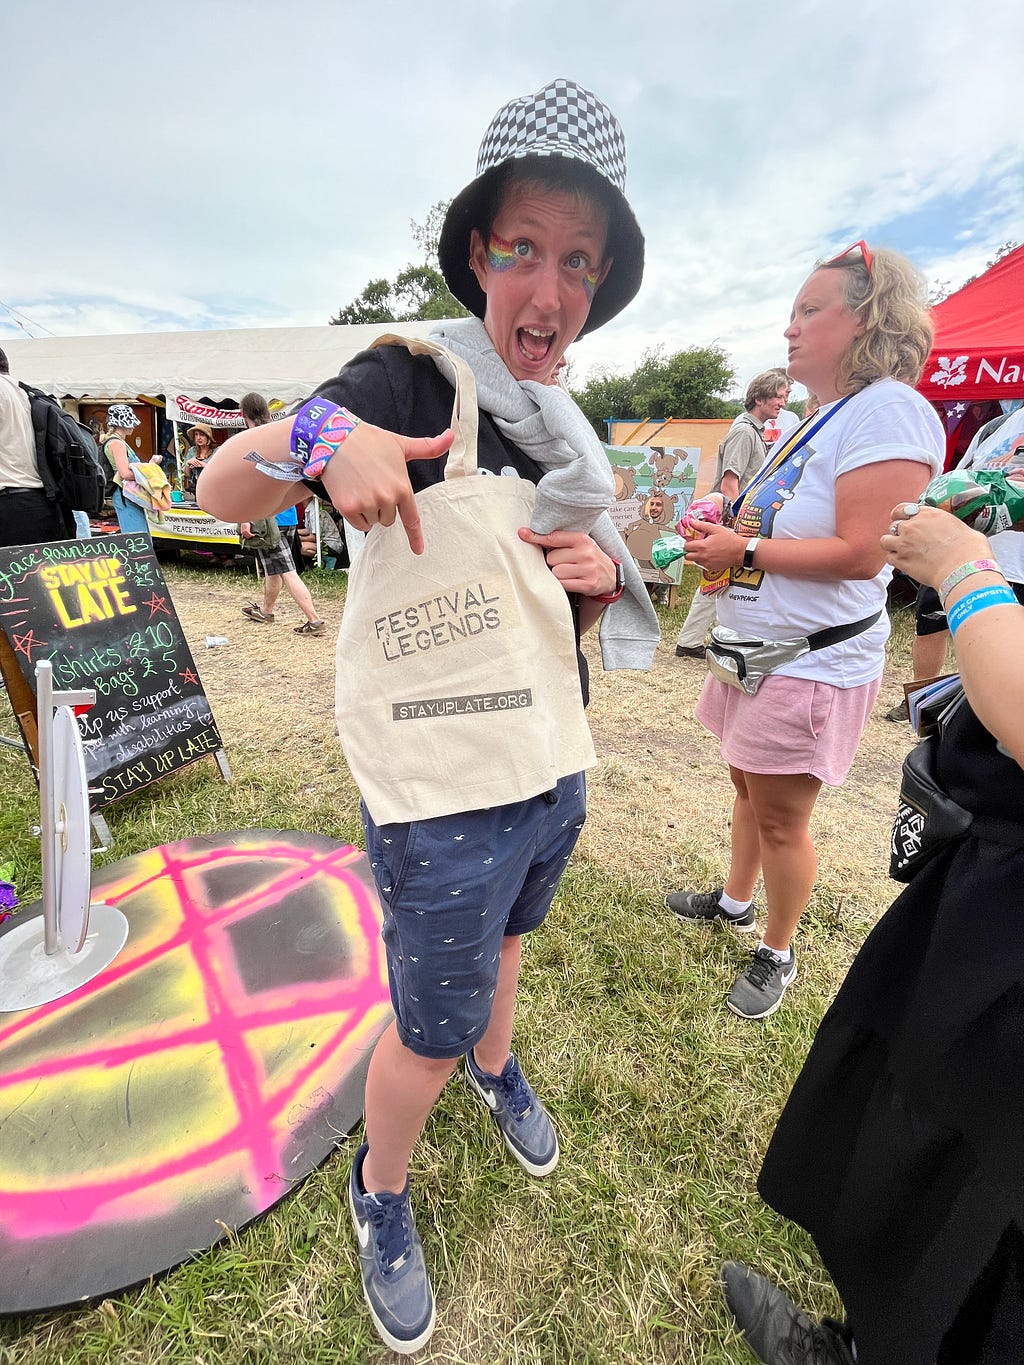 Person holding a bag and pointing to logo that says ‘Festival Legends’